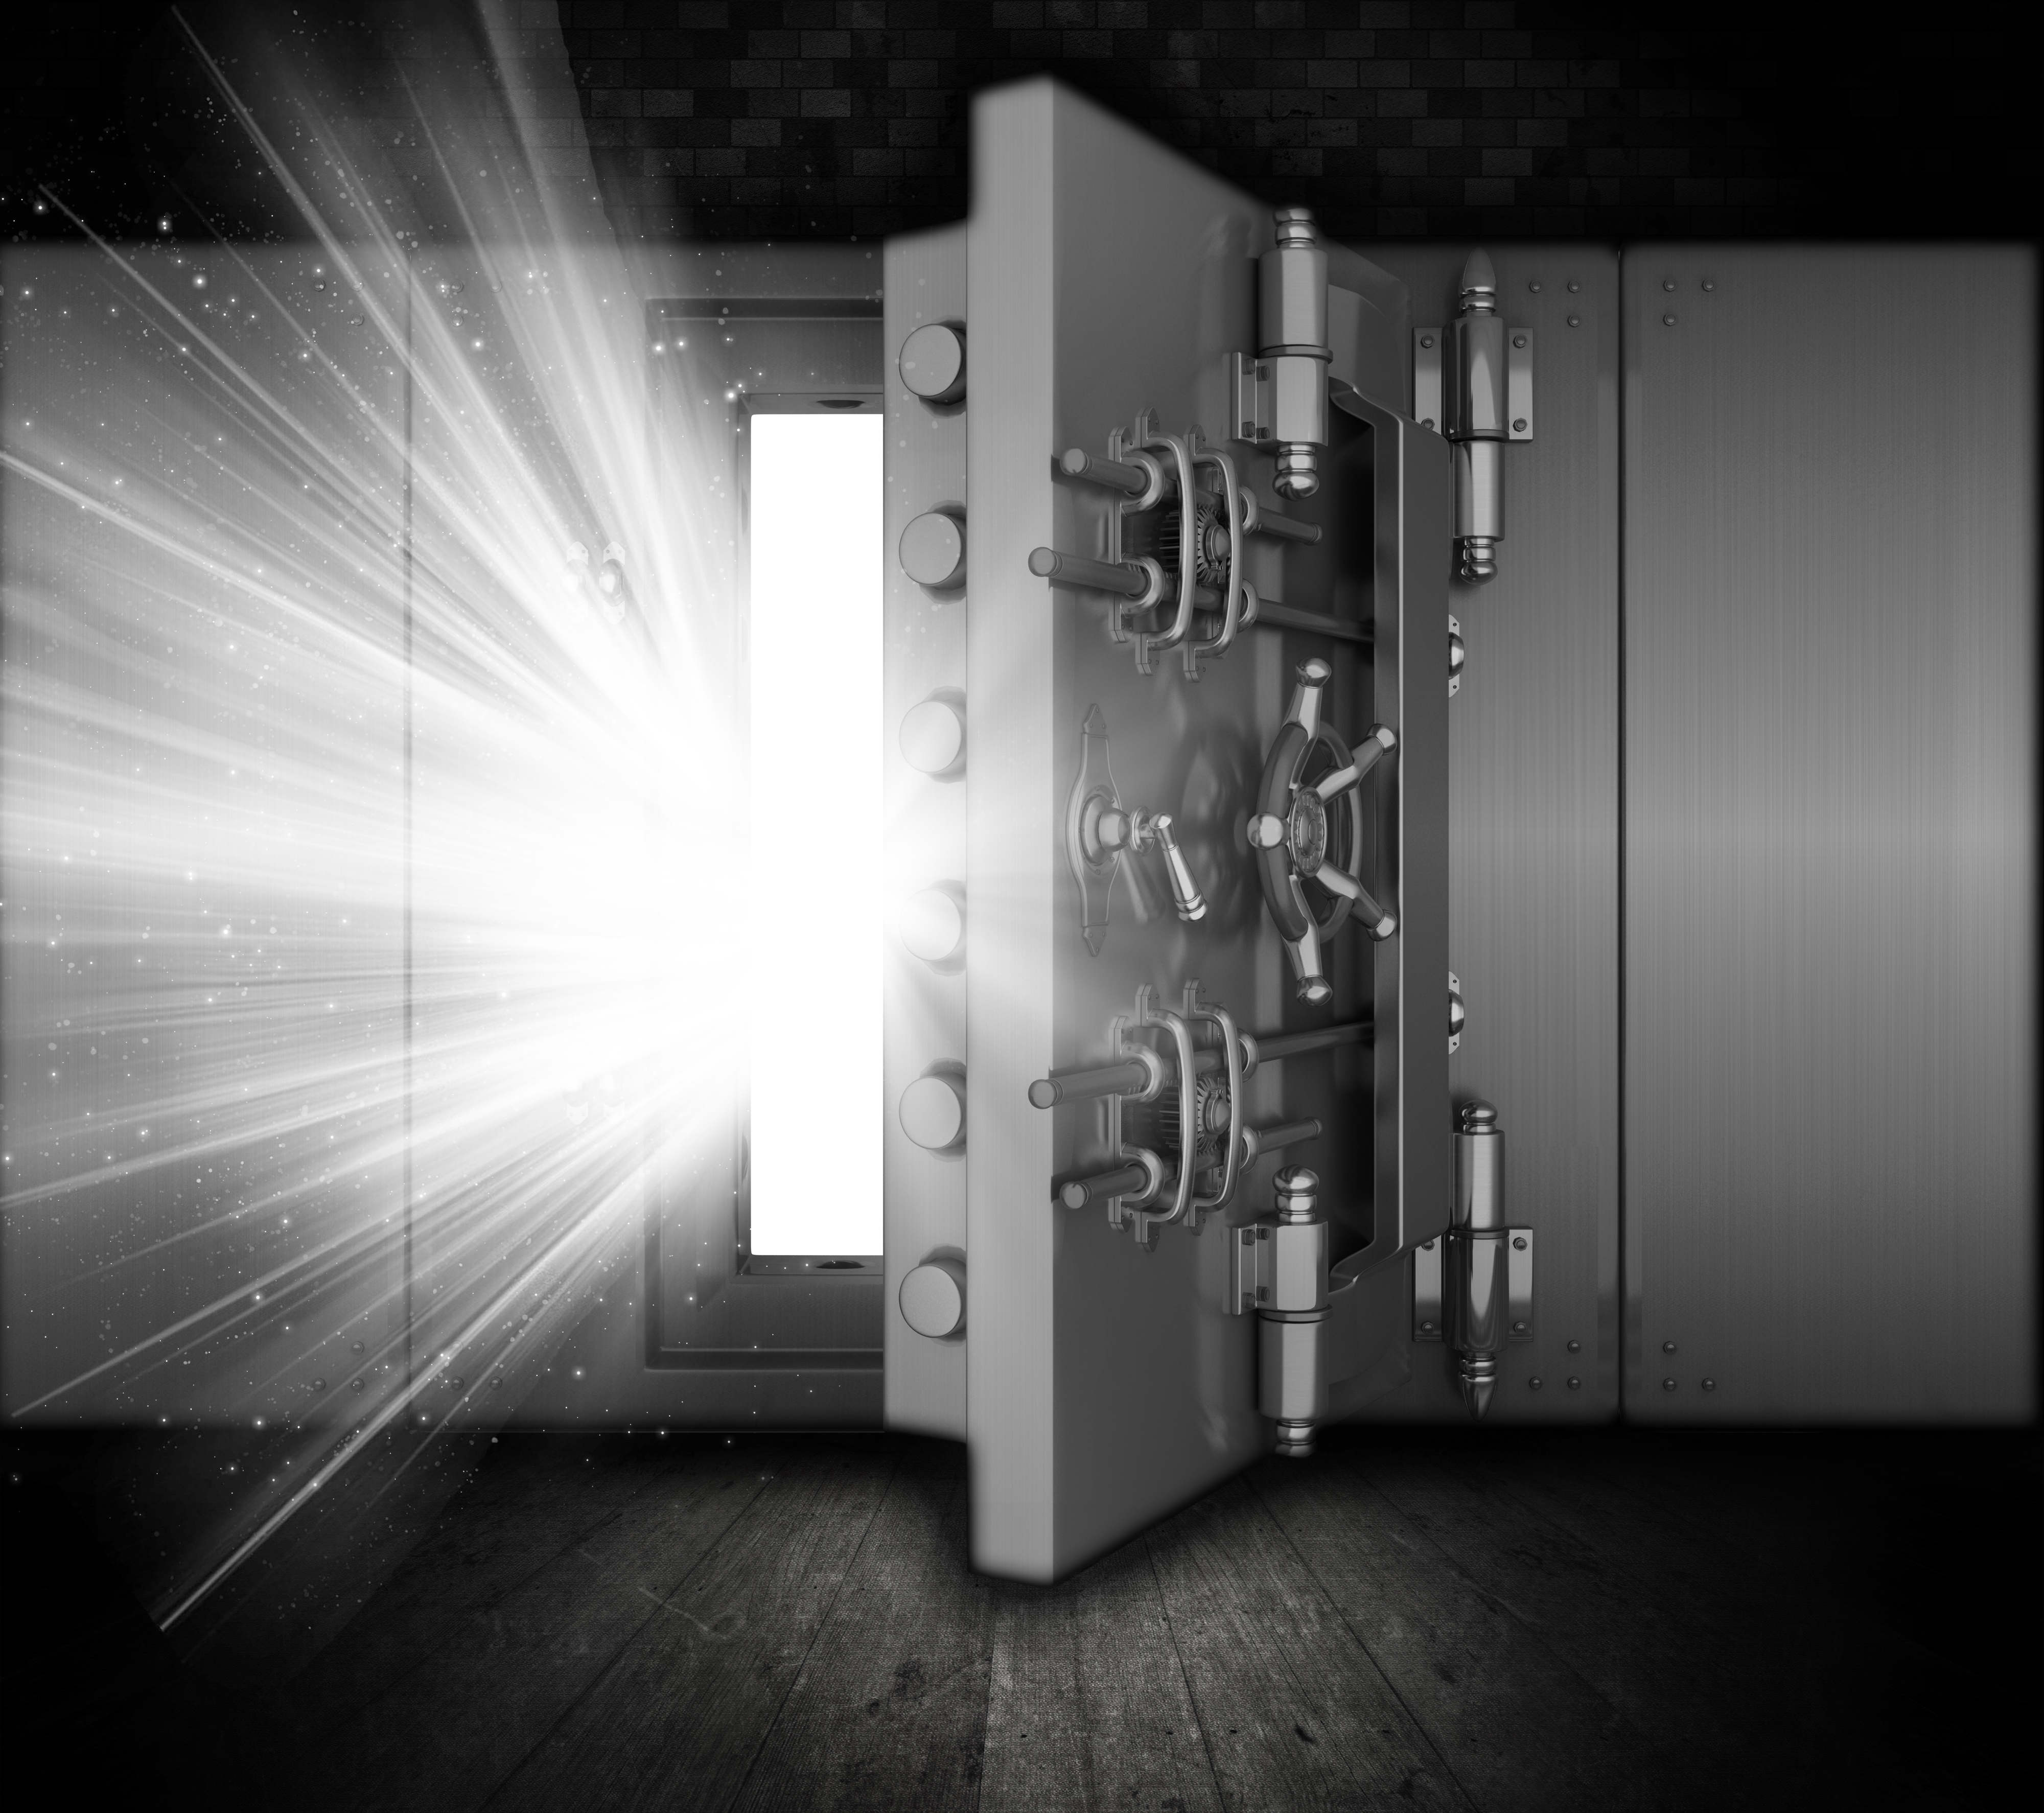 strongbox-with-light-beams-coming-out-open-door.jpg